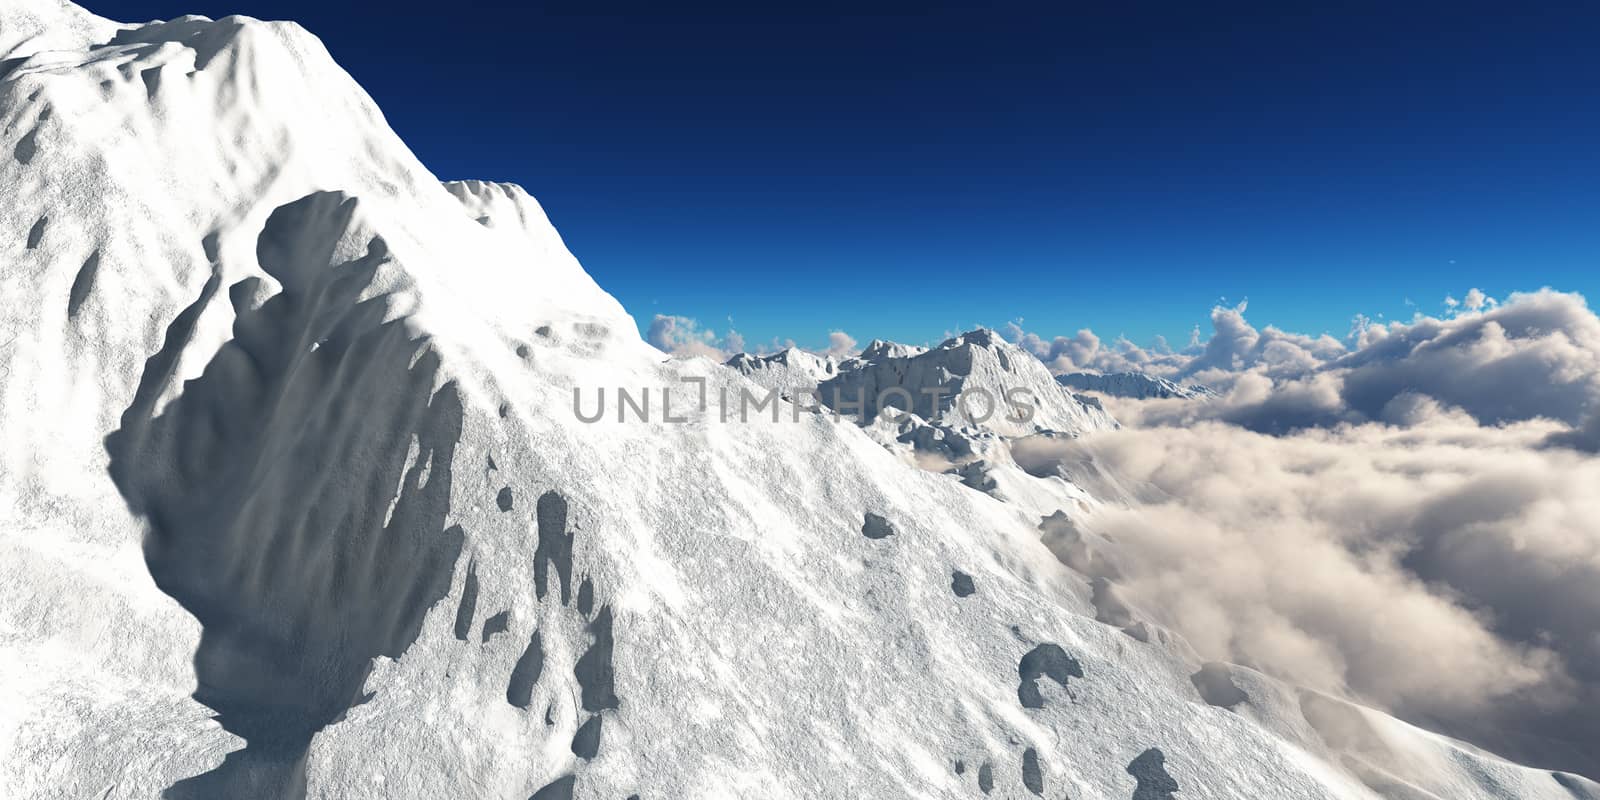 Mountain panorama over the clouds. Computer generated 3D illustration by alex_nako